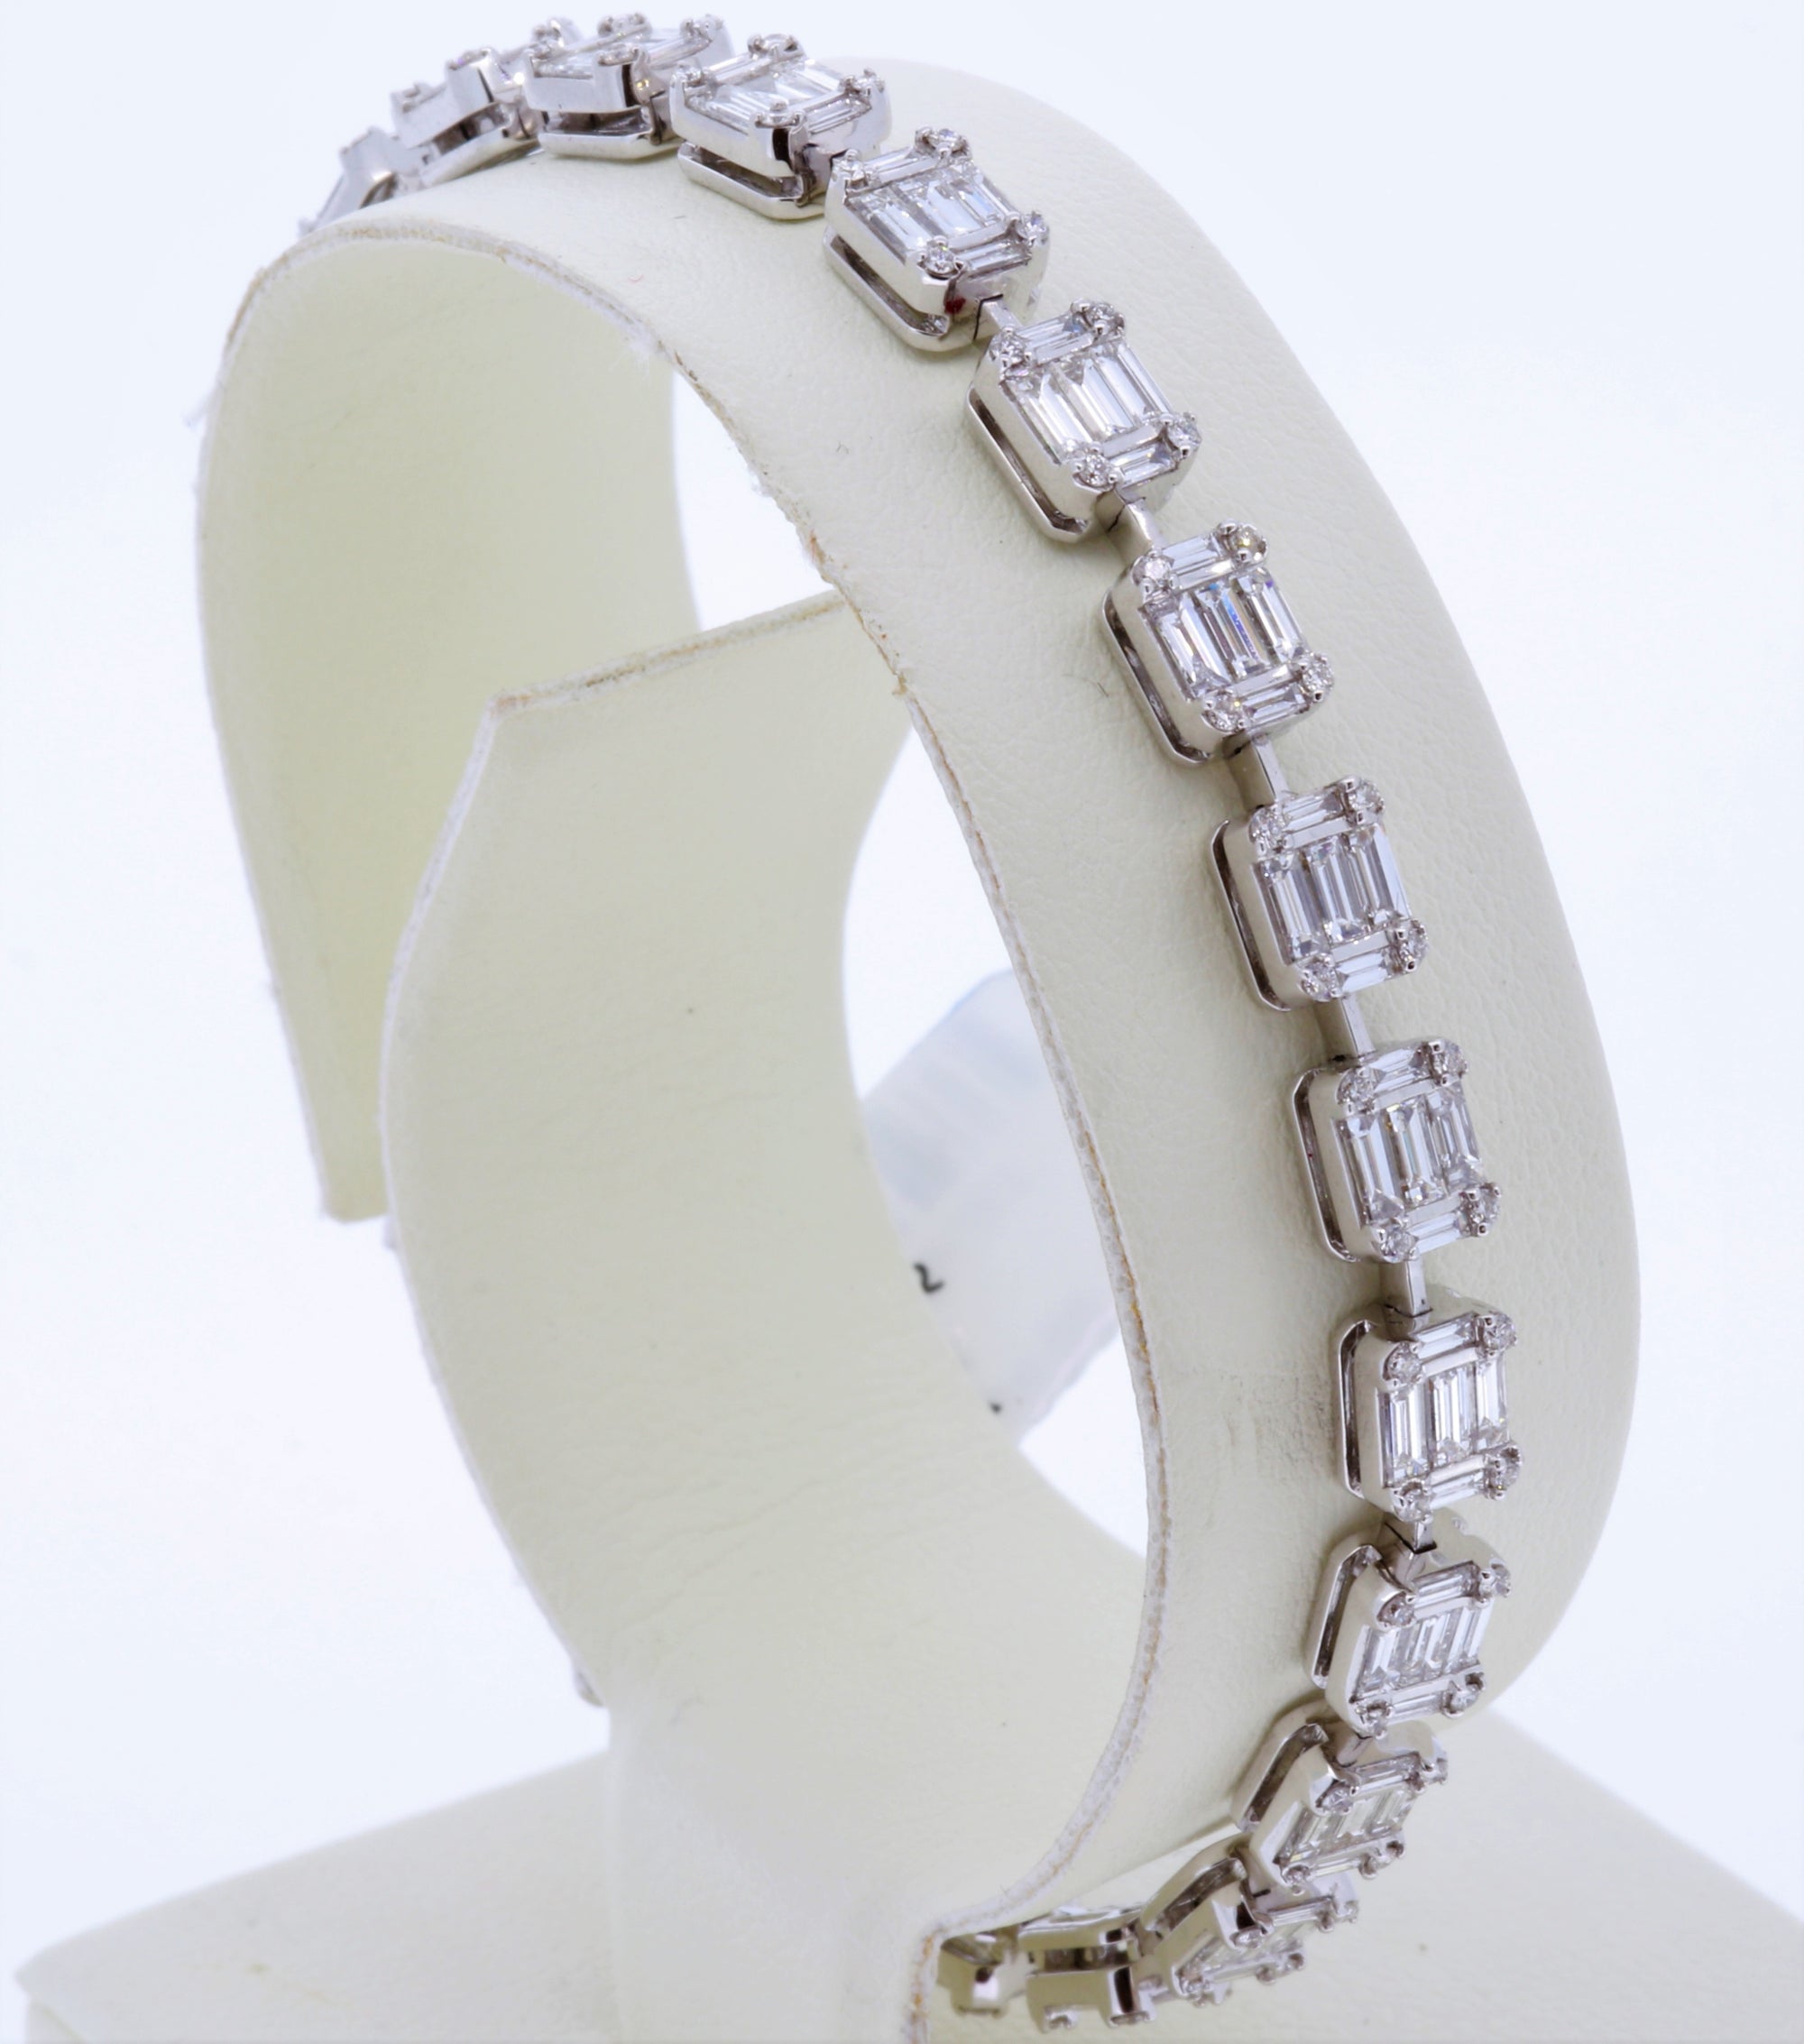 18Kt Ladies White Gold Diamond Bracelet With 3.86Cts Baguettes And 0.46Cts Round Diamonds